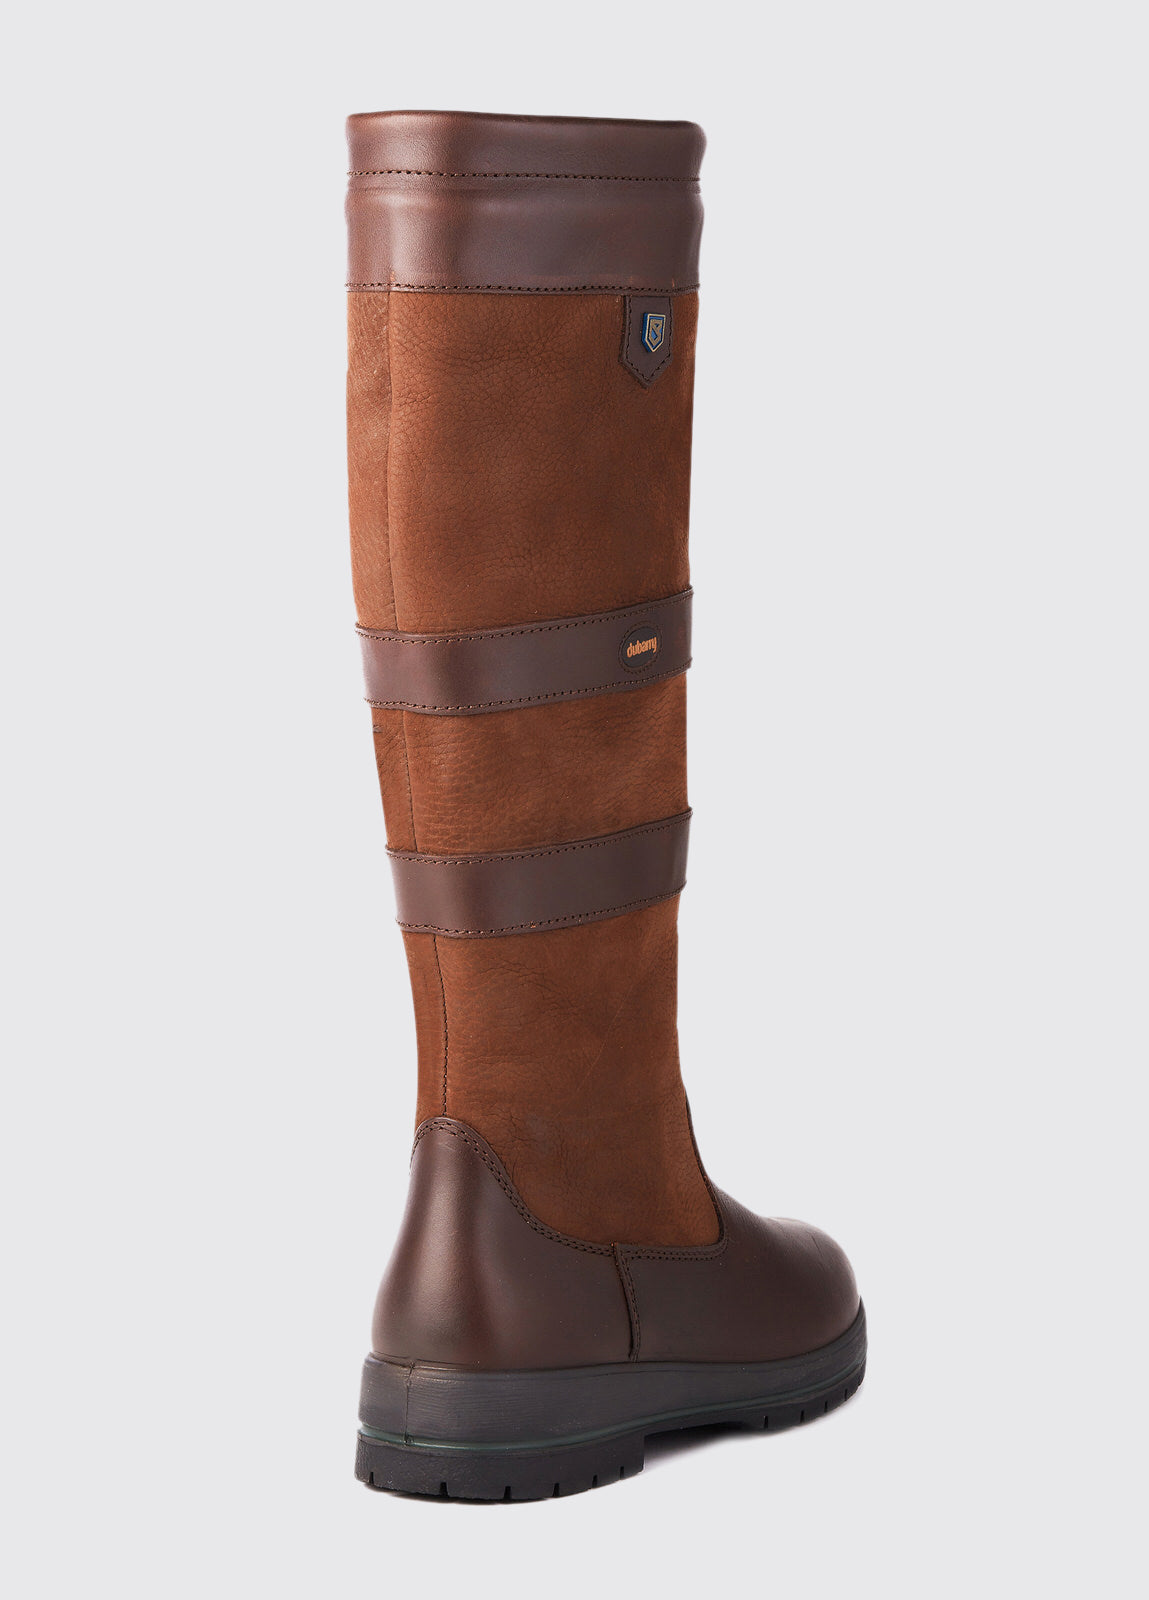 Dubarry Womens Galway Country Boot - Walnut